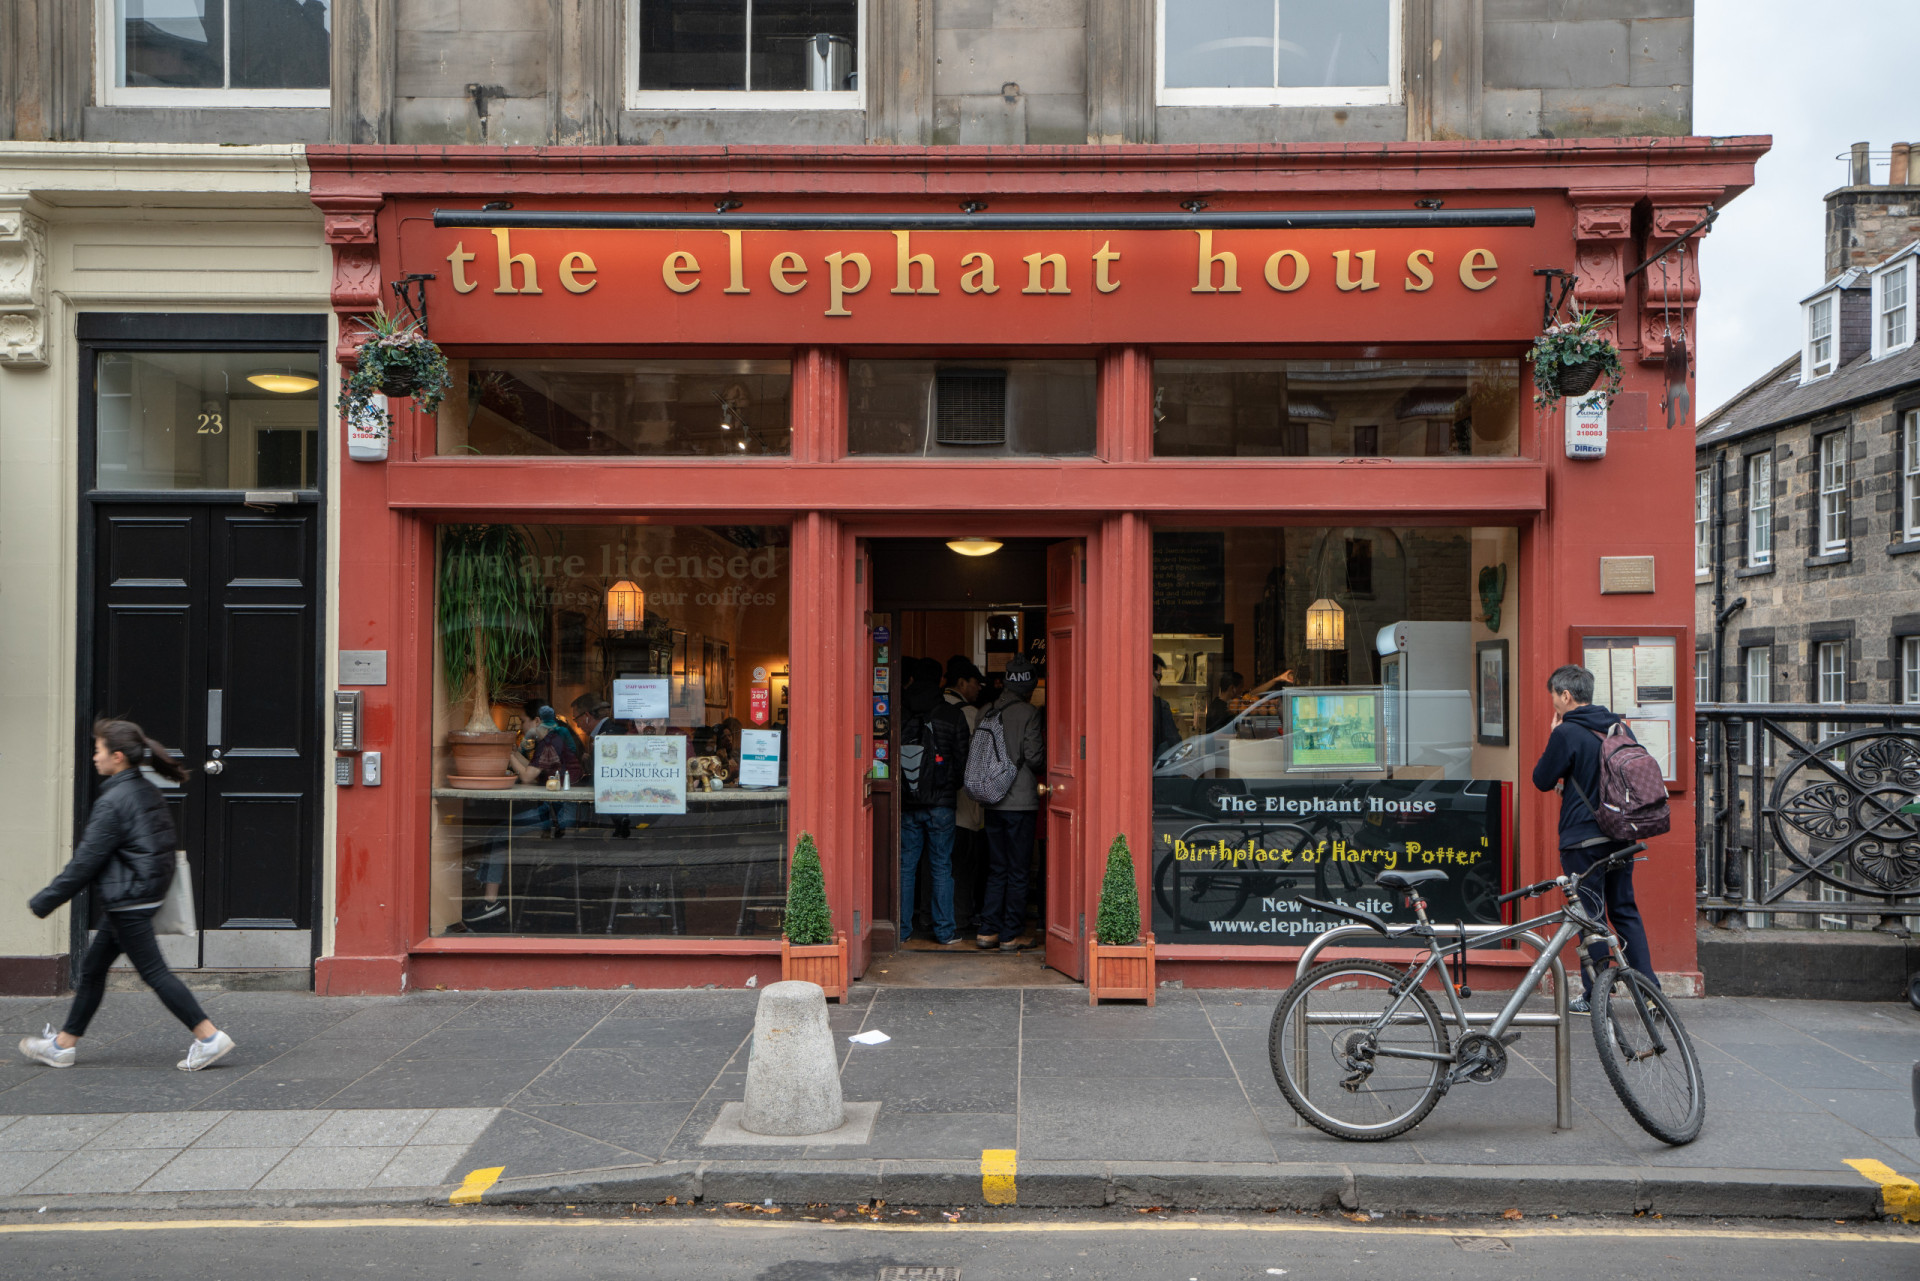 <p>J.K. Rowling drew inspiration from her surroundings in Edinburgh to create the magical world of Harry Potter. Exploring the city, one can discover hidden gems like The Elephant House cafe, where Rowling penned early chapters of the series.</p><p>You may also like:<a href="https://www.starsinsider.com/n/445219?utm_source=msn.com&utm_medium=display&utm_campaign=referral_description&utm_content=639745en-us"> How to protect your children from sexual abuse</a></p>